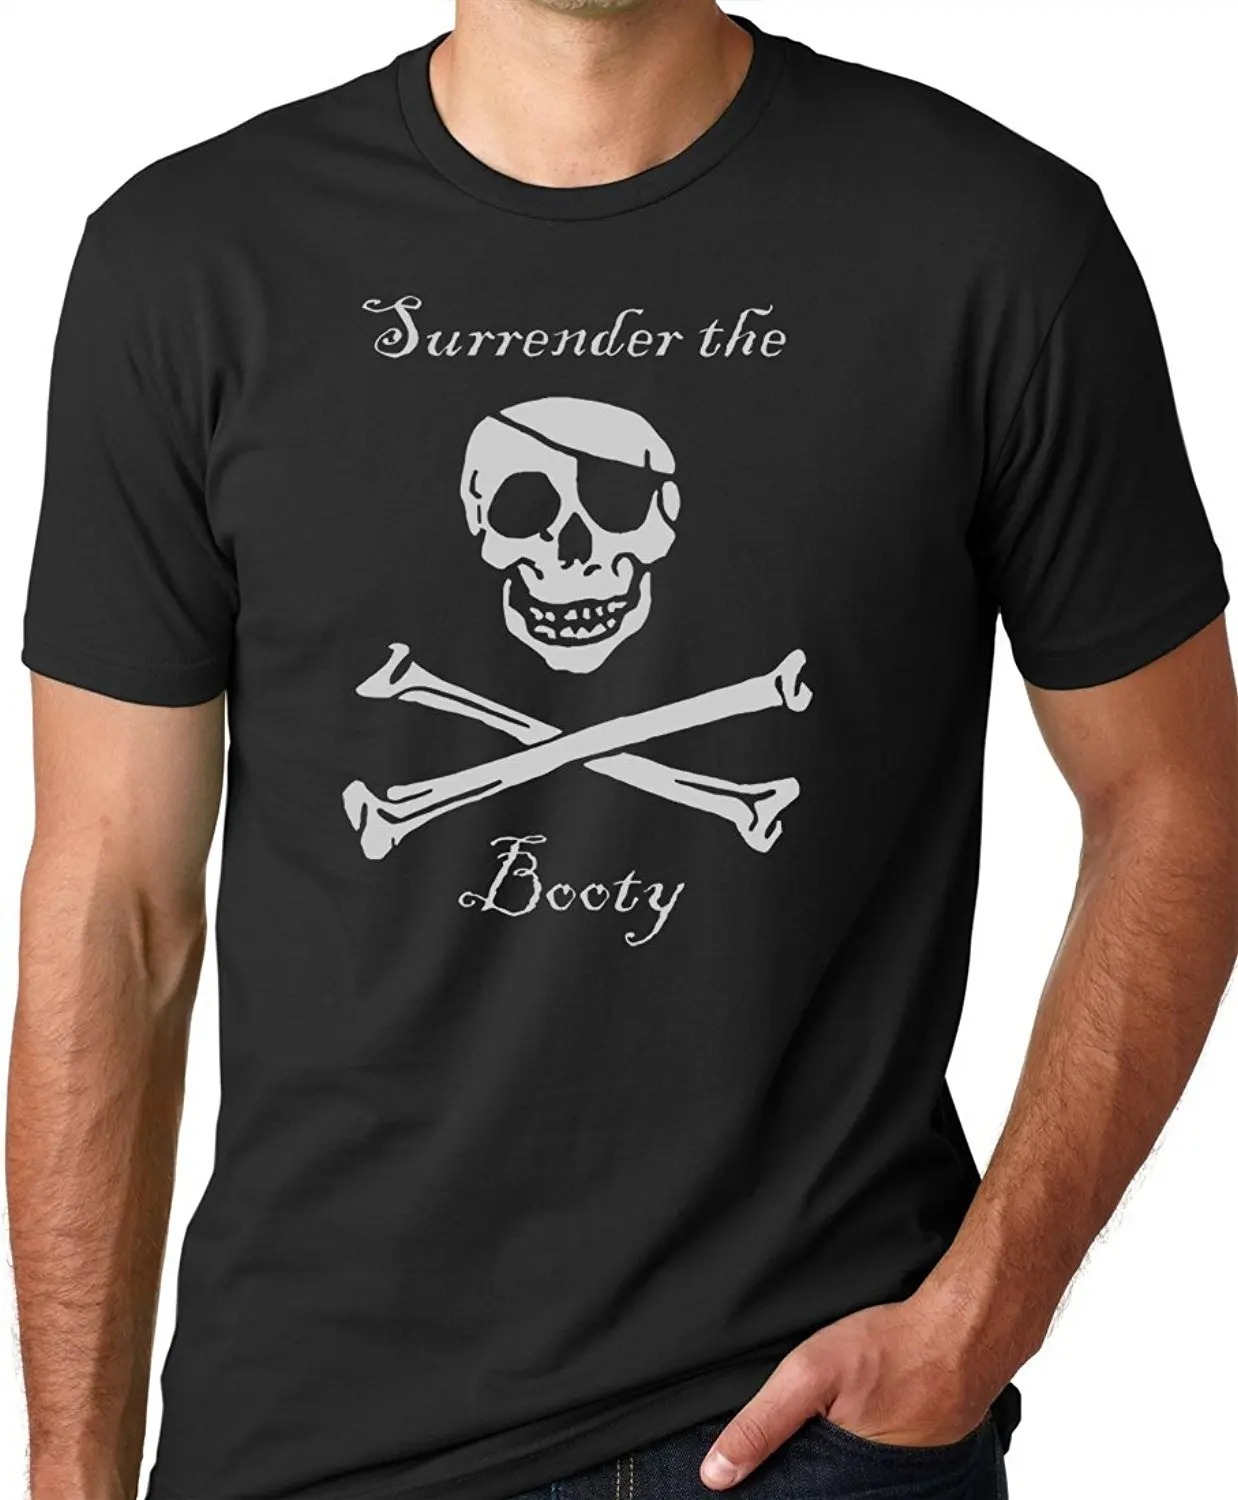 

2019 New Summer Cool Tee Shirt Surrender The Booty Funny Pirate T-shirt Cotton T-shirt